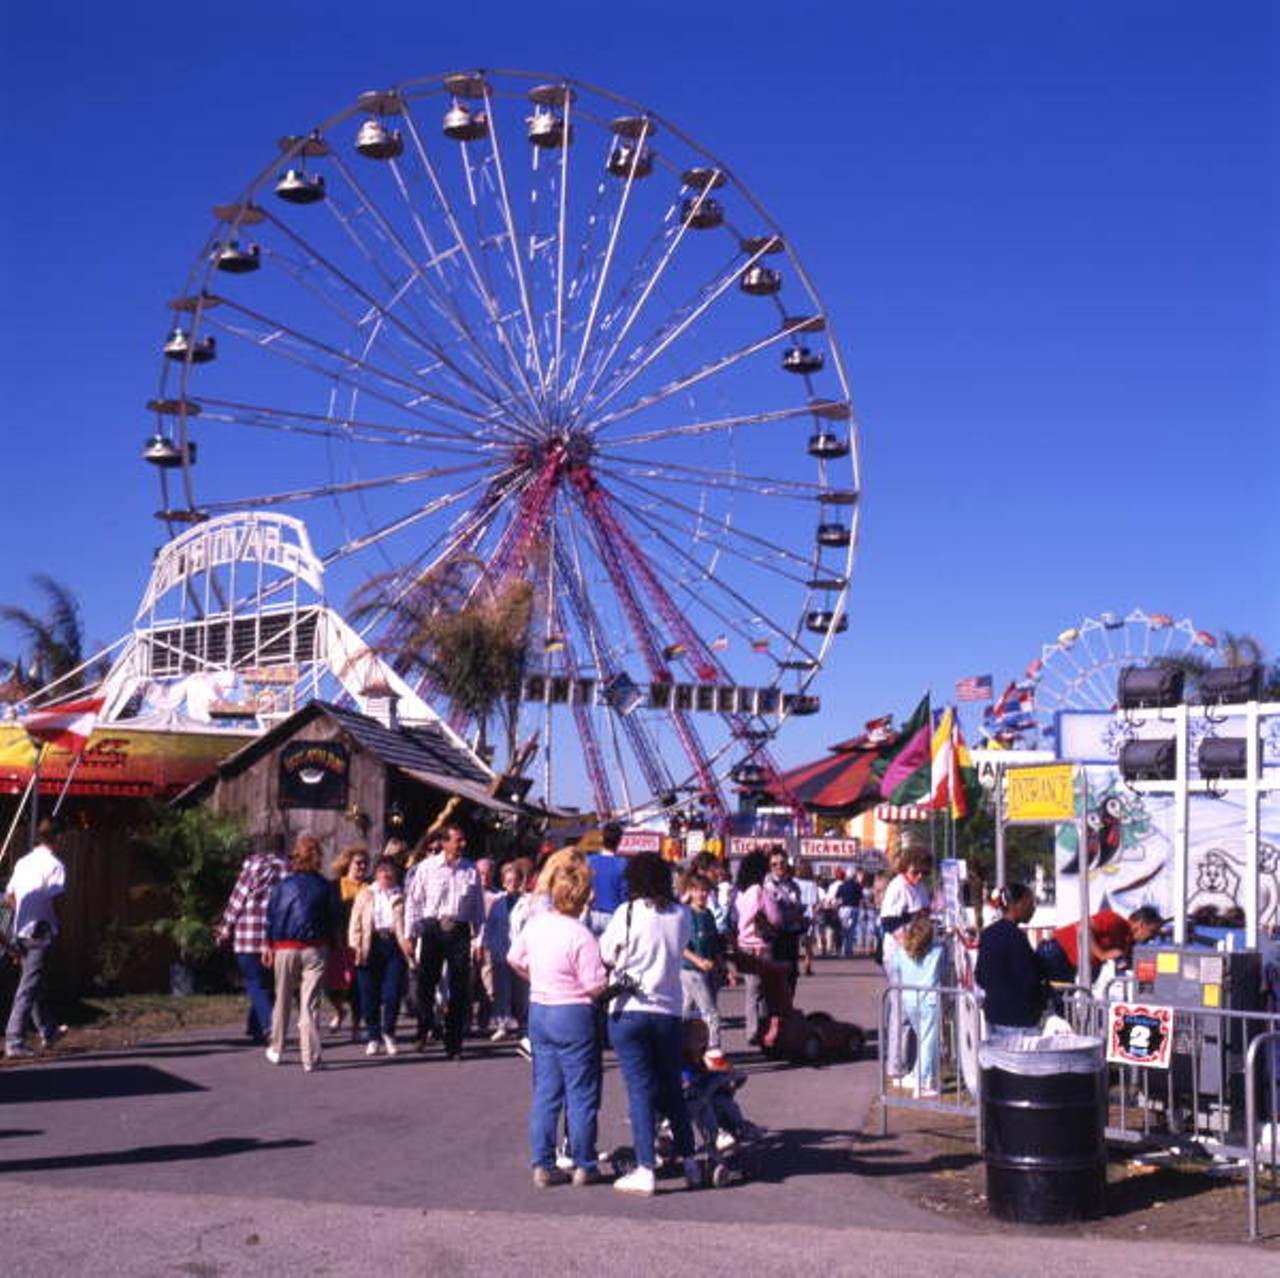 Scene from the Florida State Fair in Tampa, 1990